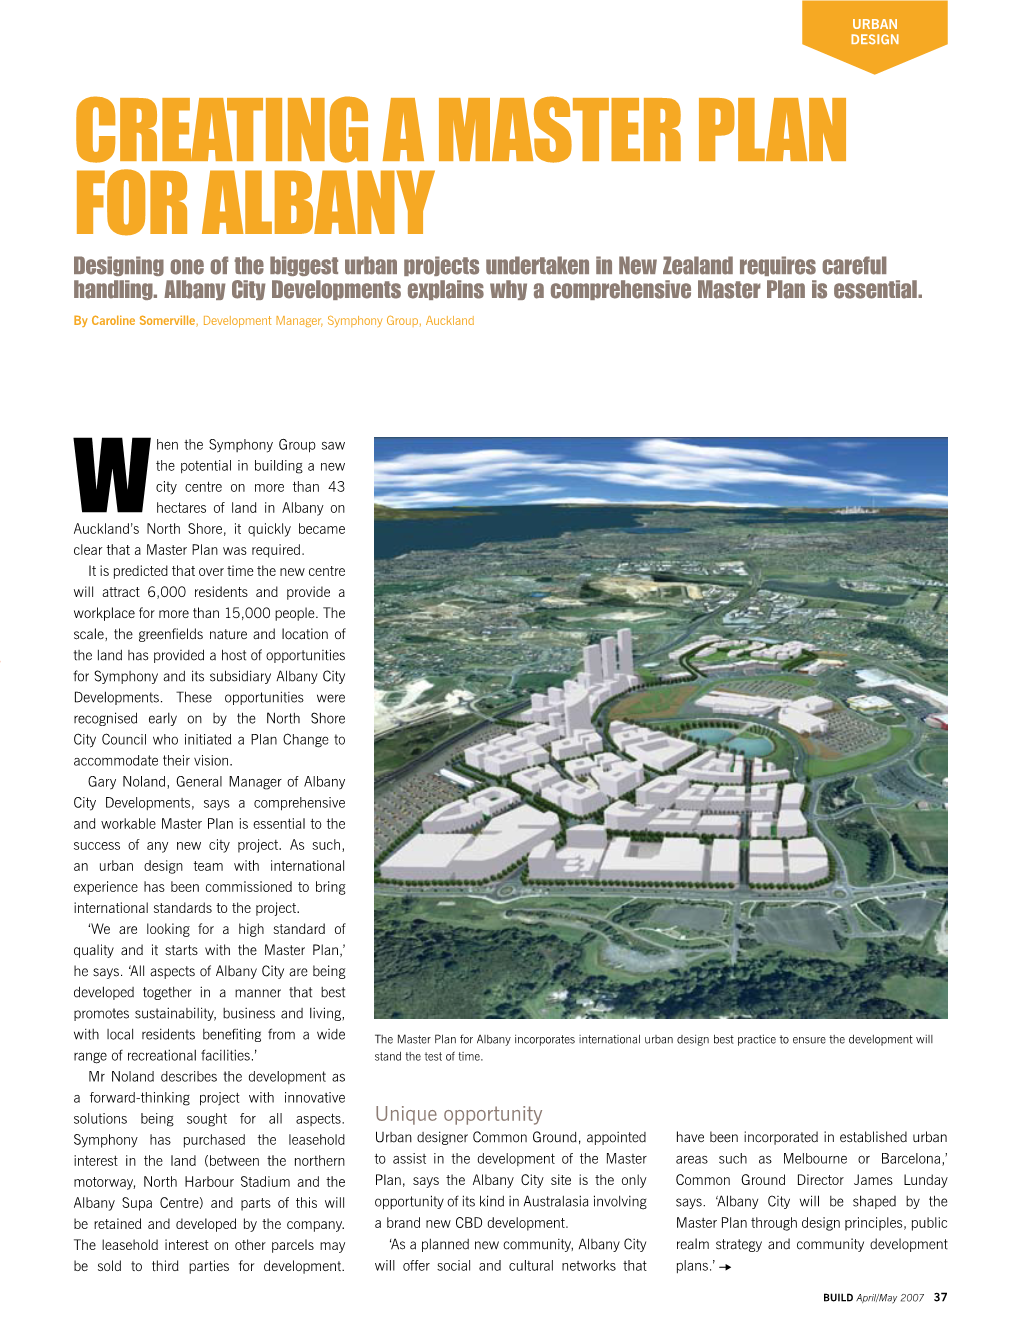 Creating a Master Plan for Albany Designing One of the Biggest Urban Projects Undertaken in New Zealand Requires Careful Handling